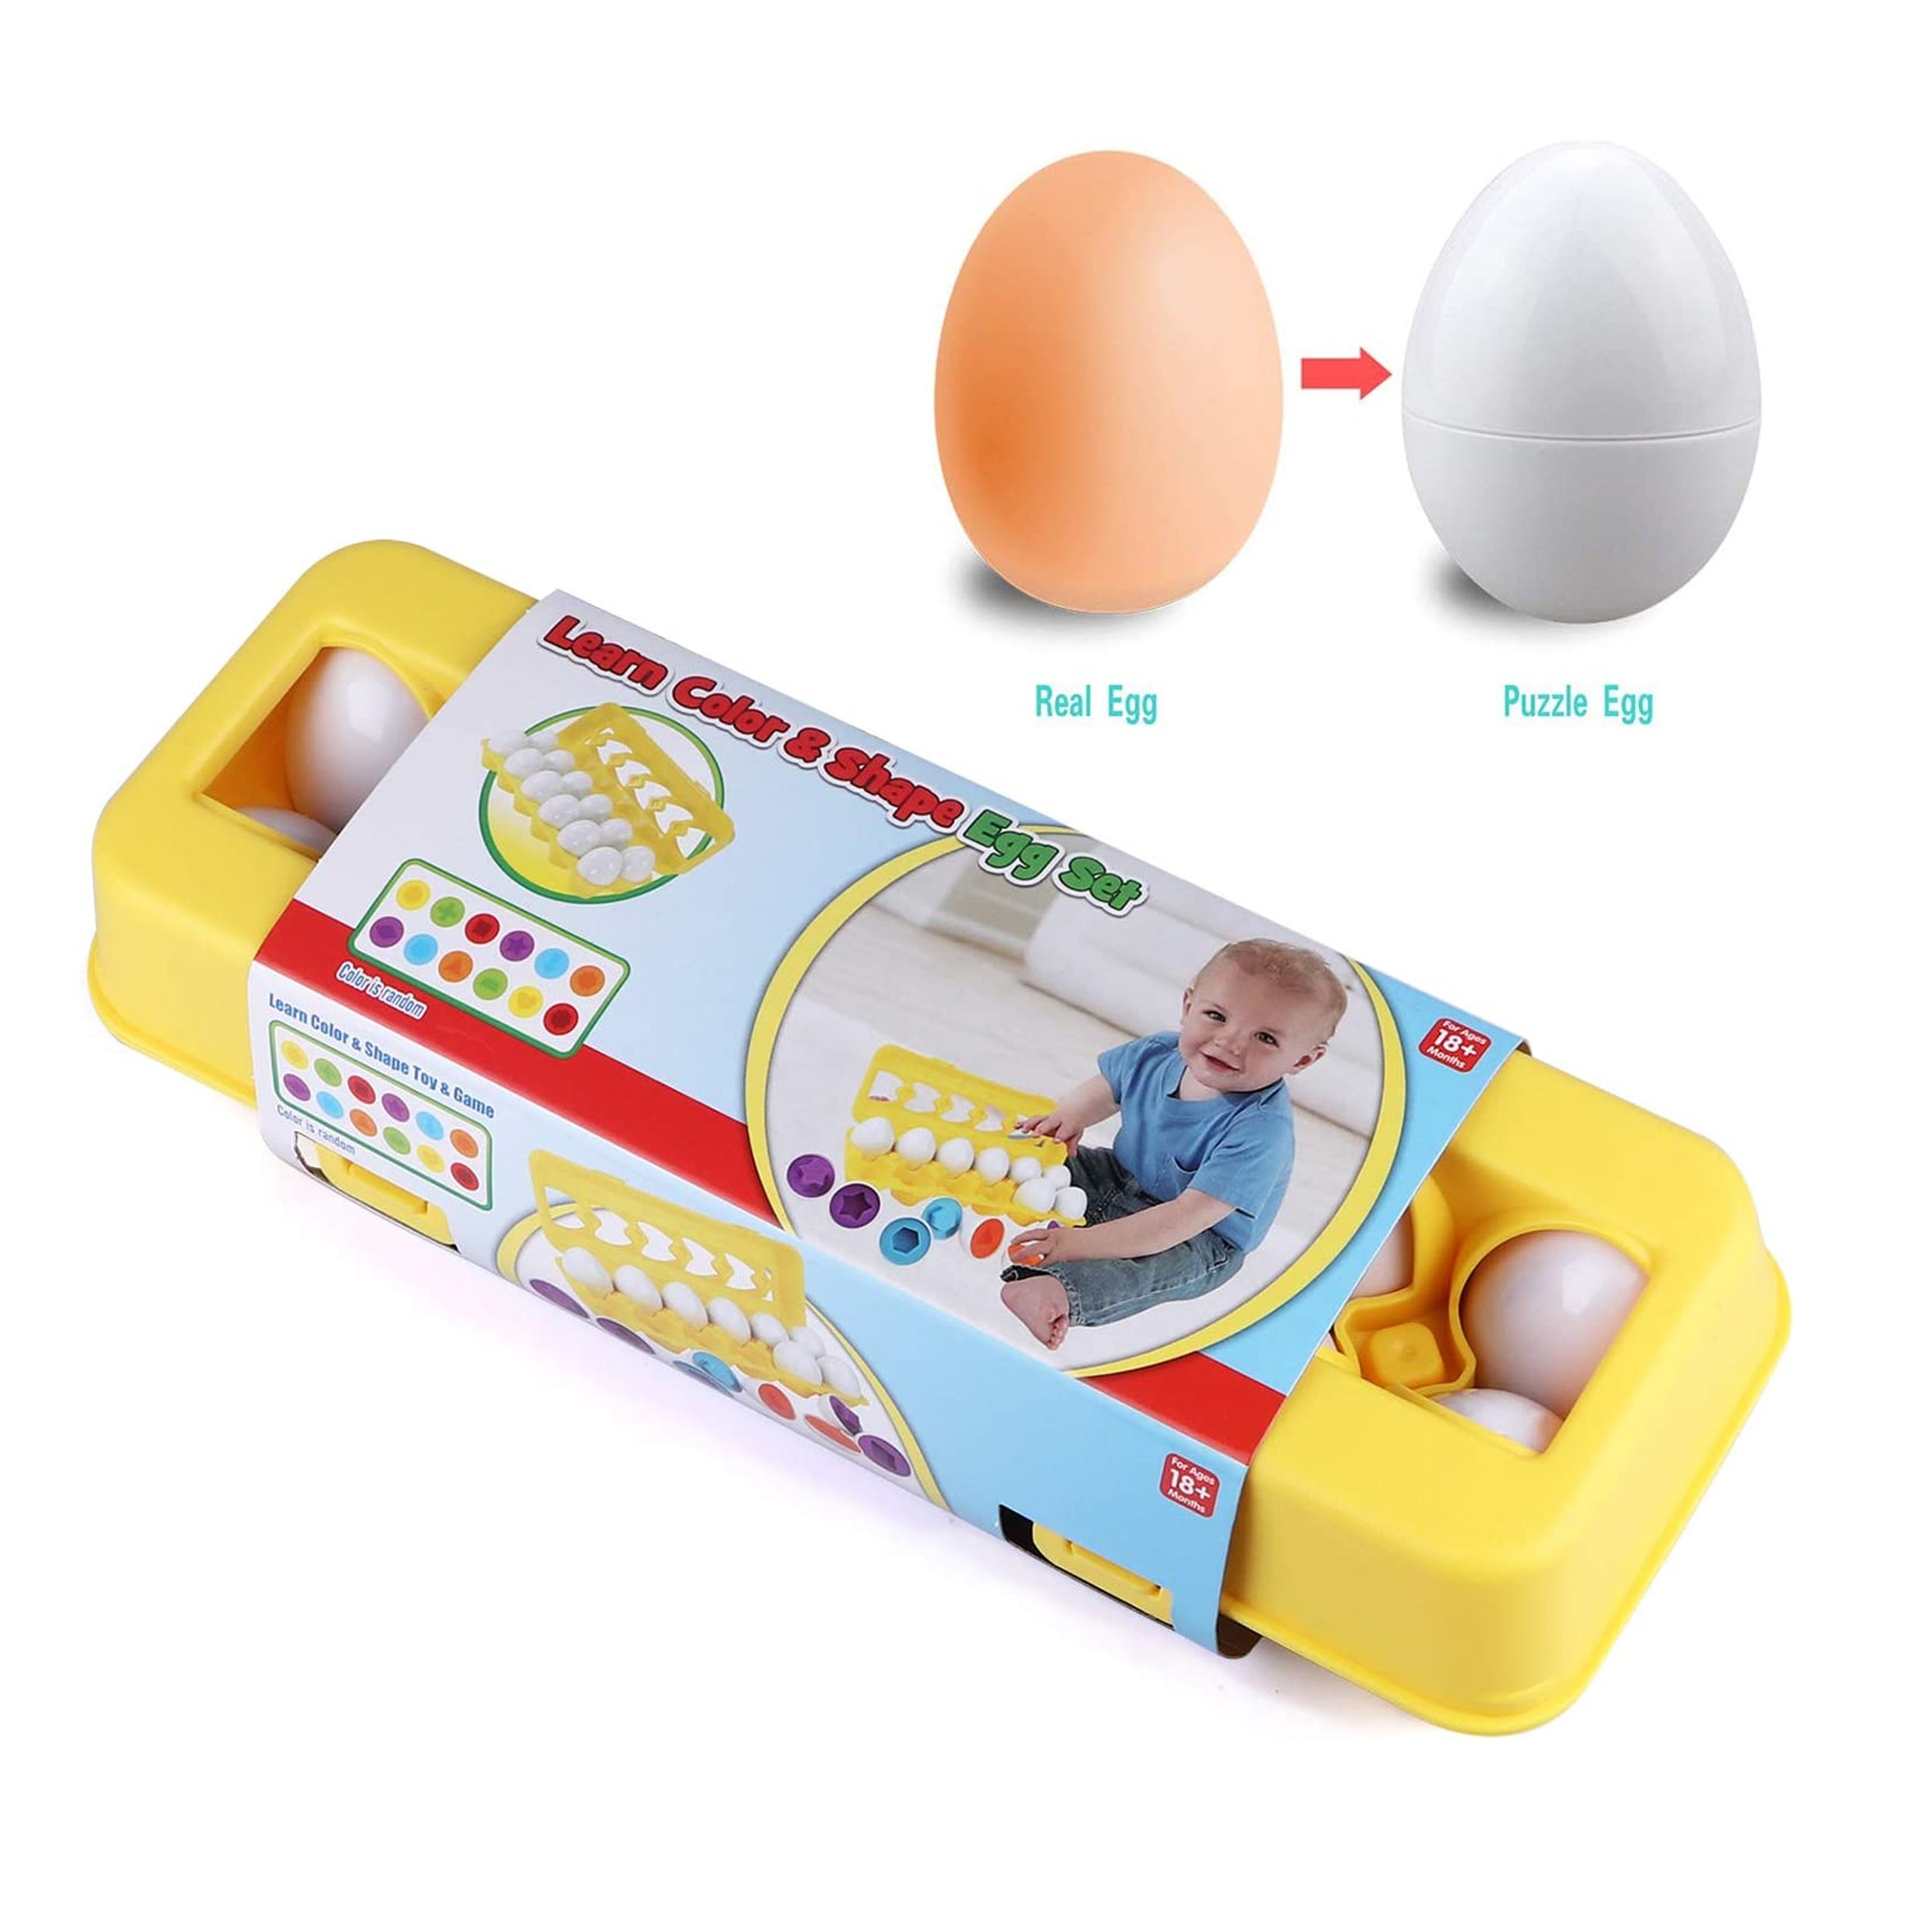 Match and Learn Eggs - Basic Shapes and Colors Preschool Toy